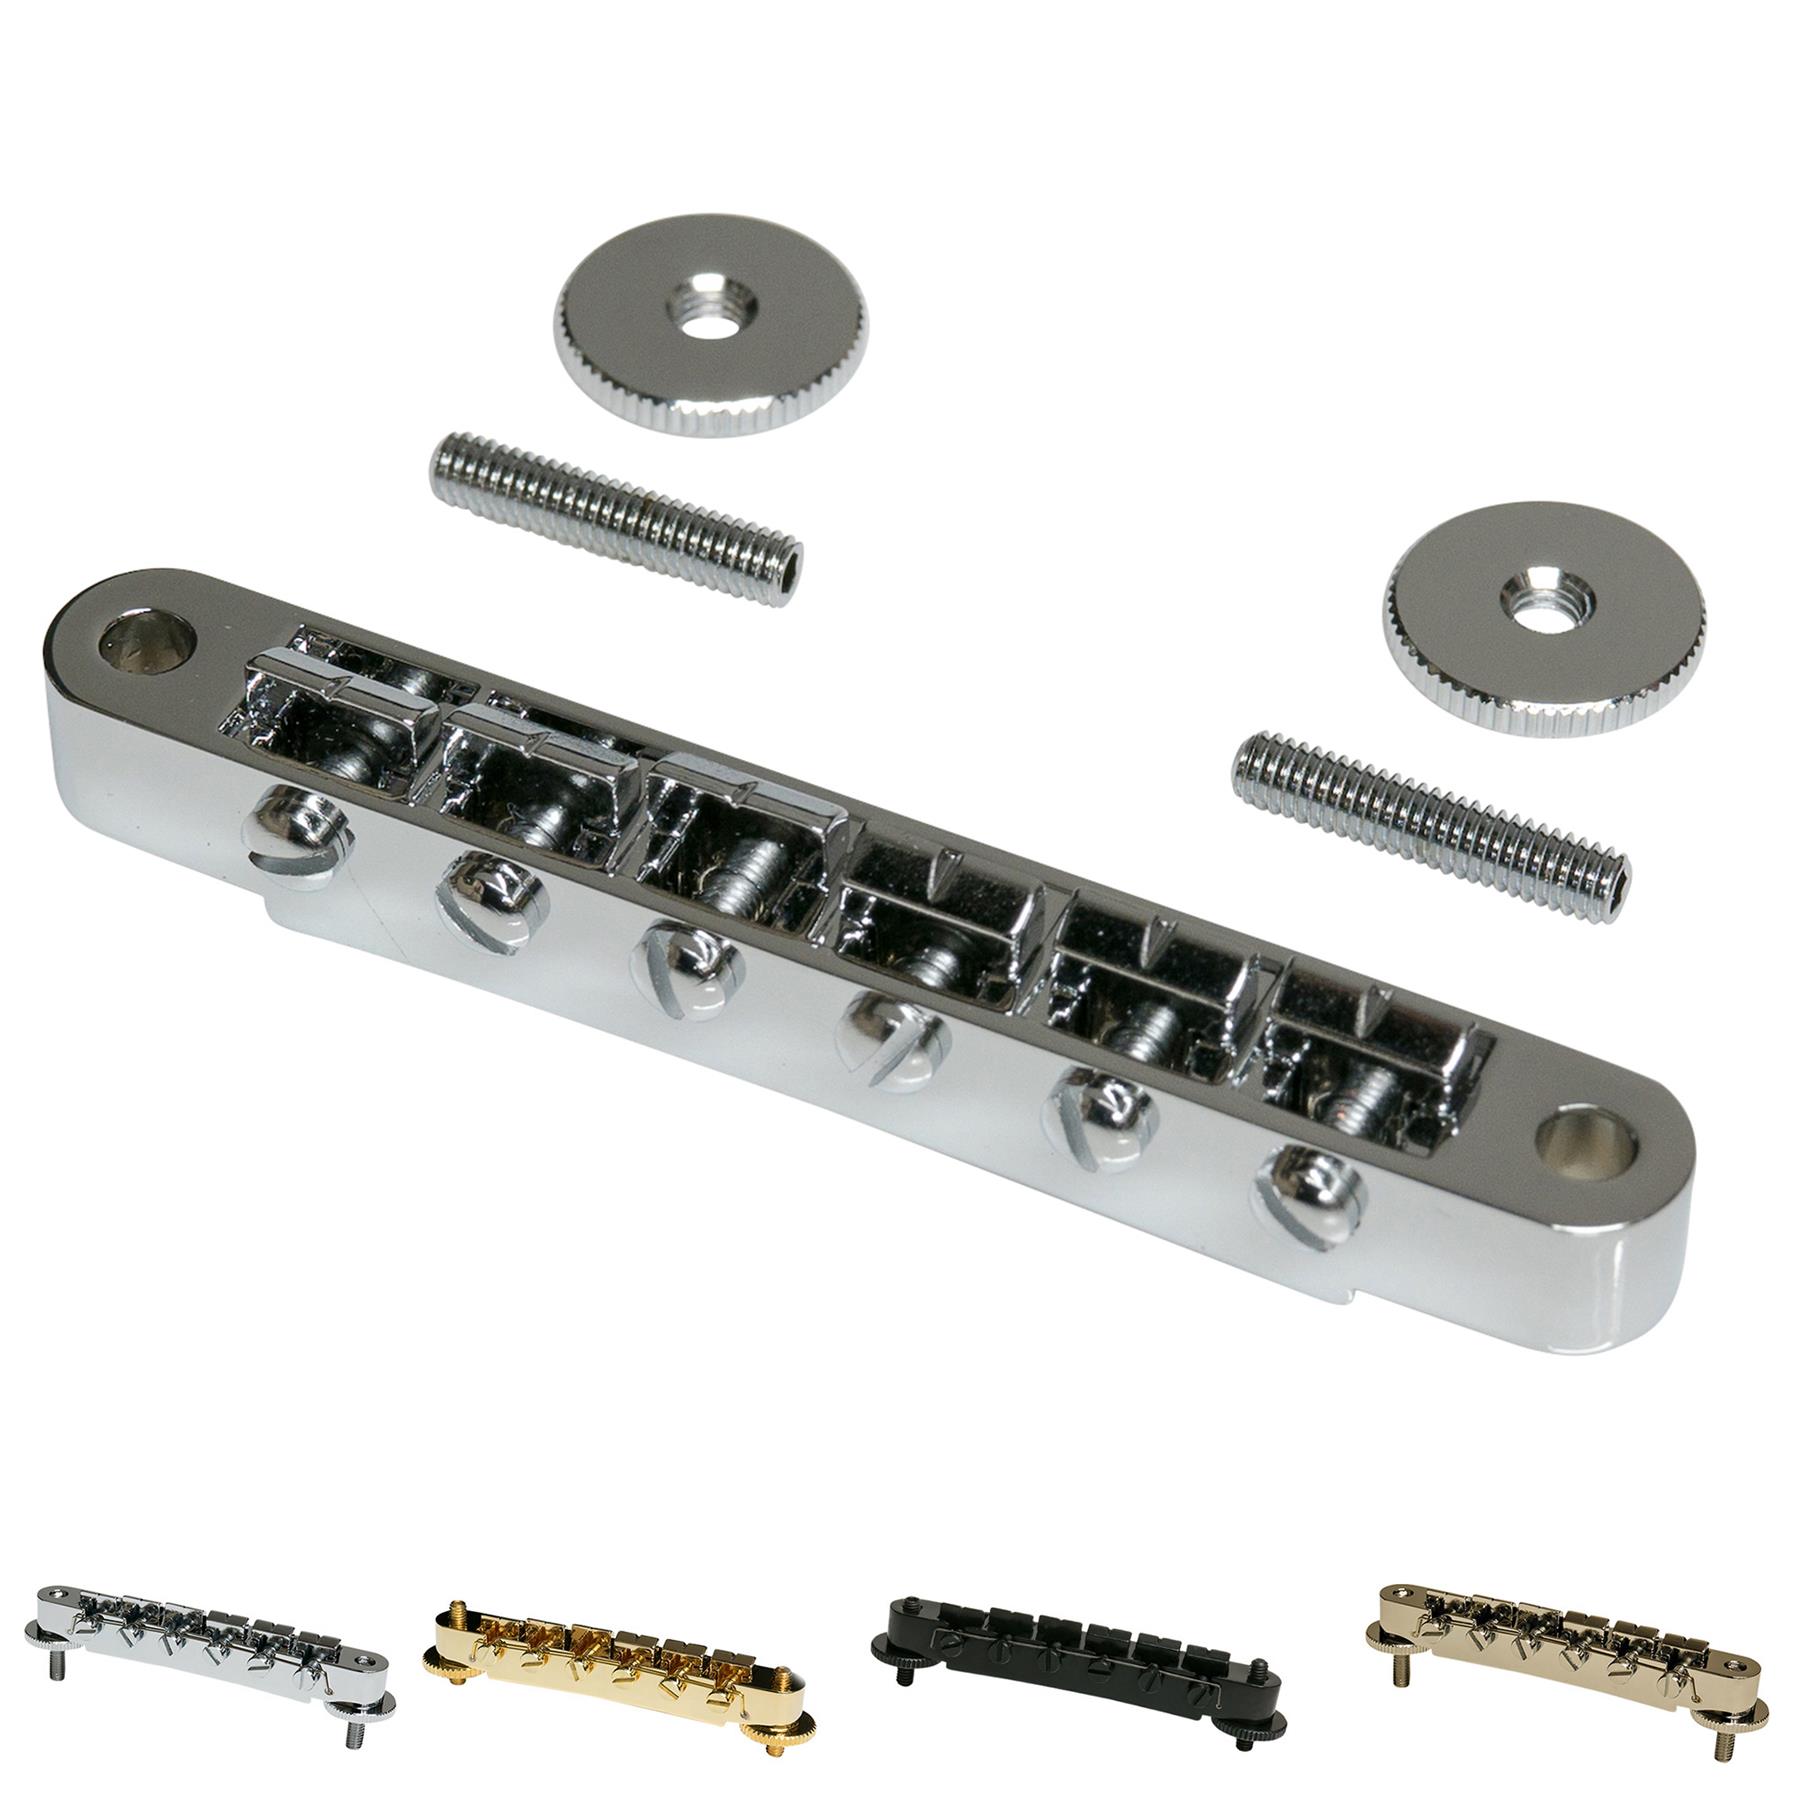 Lion Pattern Chrome LAMSAM ABR-1 Style Tune-o-matic Bridge Stop Tailpiece Combos Brass Roller Saddle TOM Bridge & Tail-piece with Large Metic Studs Posts for Les Paul Style Electric Guitars 